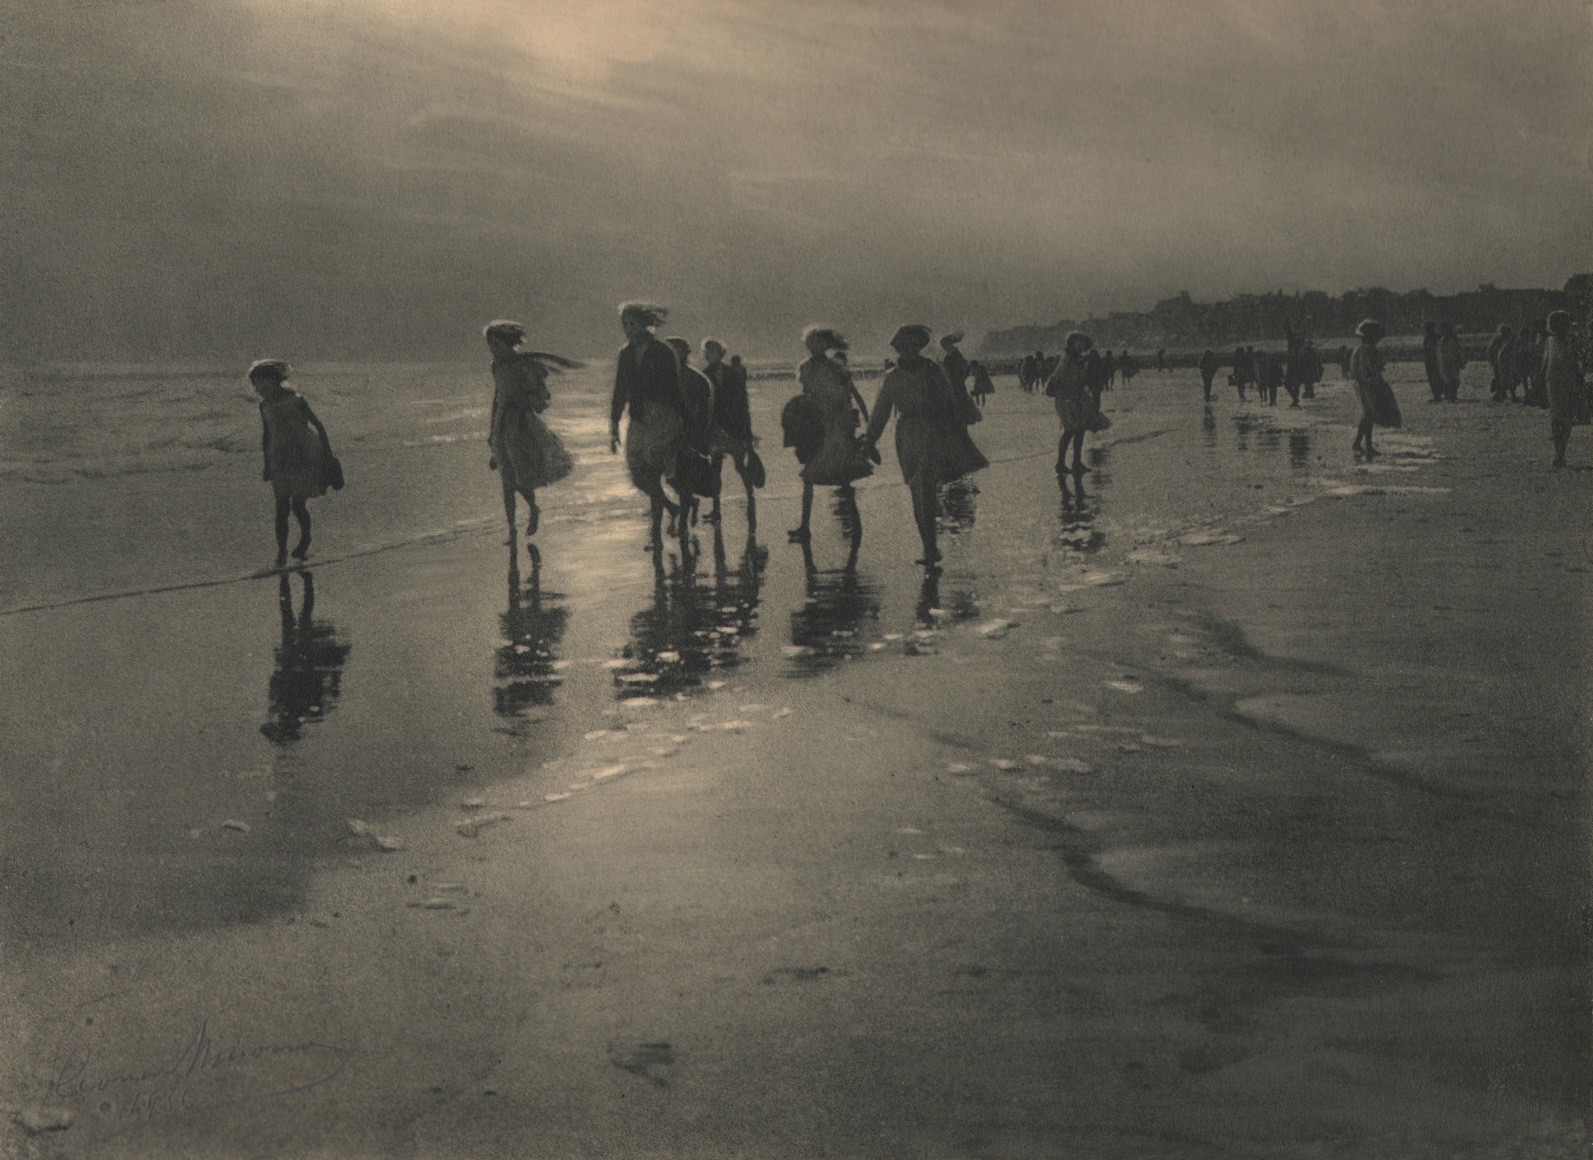 21. L&eacute;onard Misonne, La brise, 1926. A group of girls walk along the beach with bare feet in the water. Gray/green-toned print.